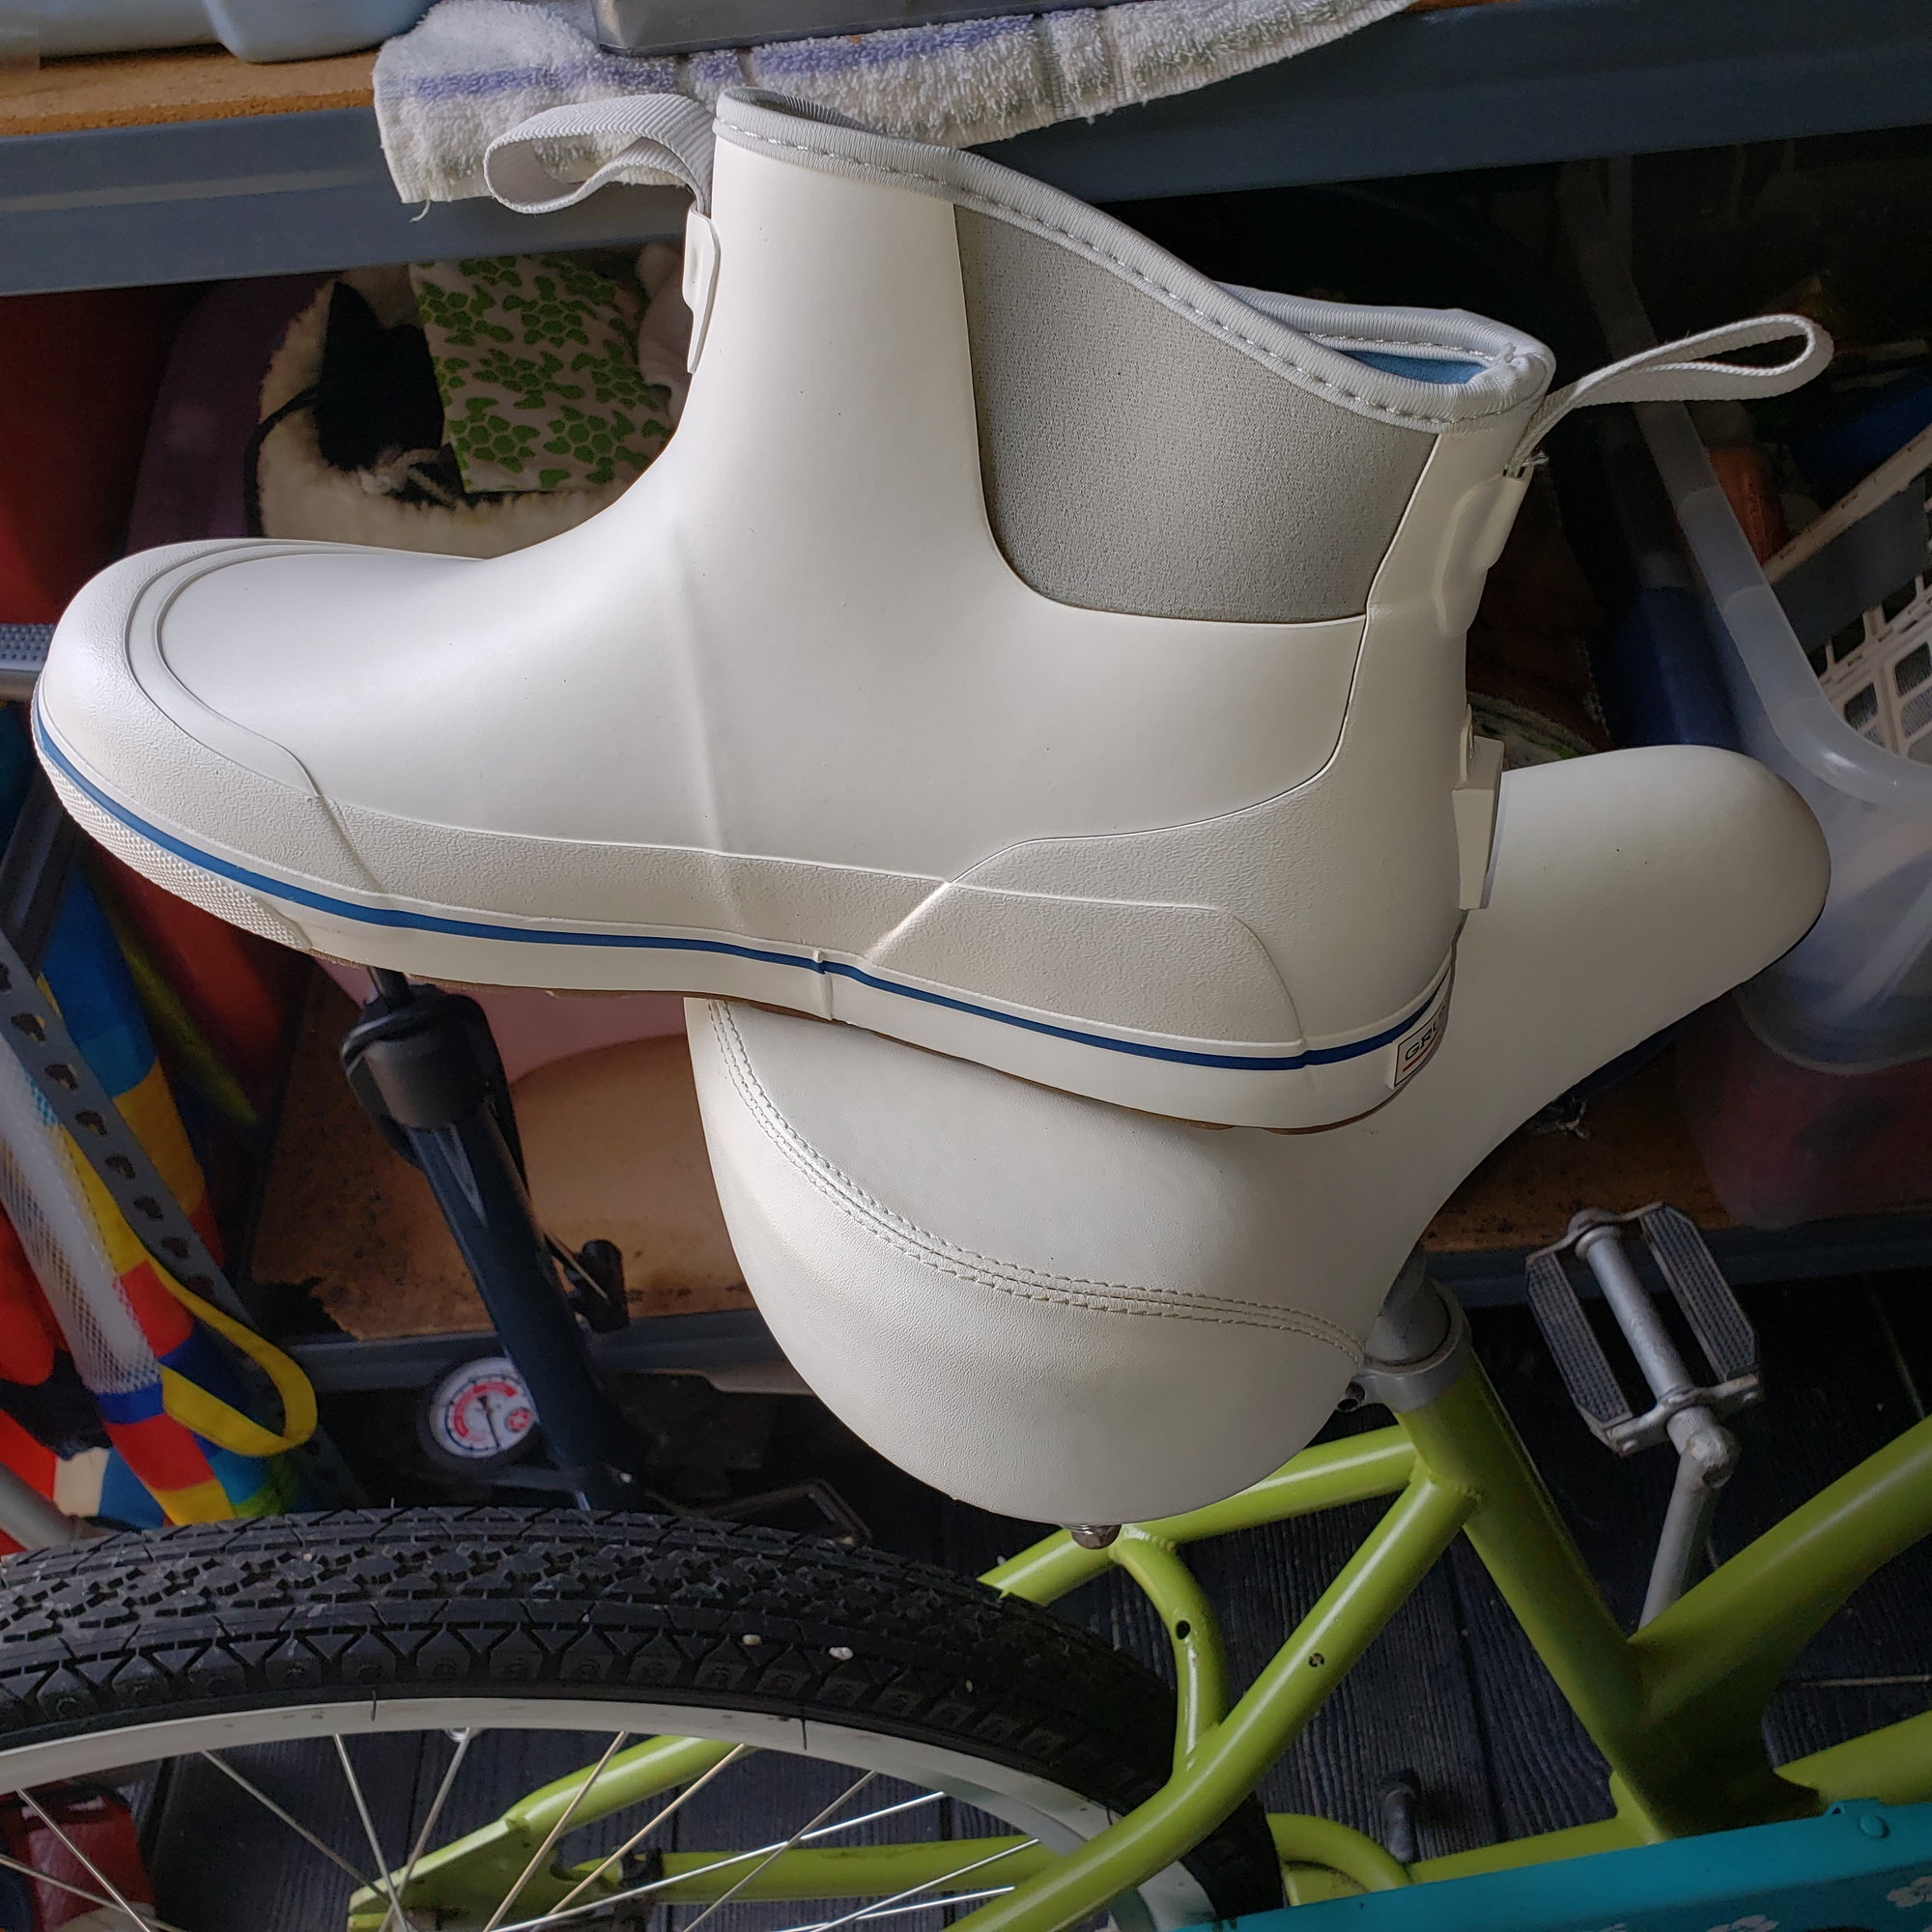 Wide rubber fishing boots - who makes? - The Hull Truth - Boating and  Fishing Forum